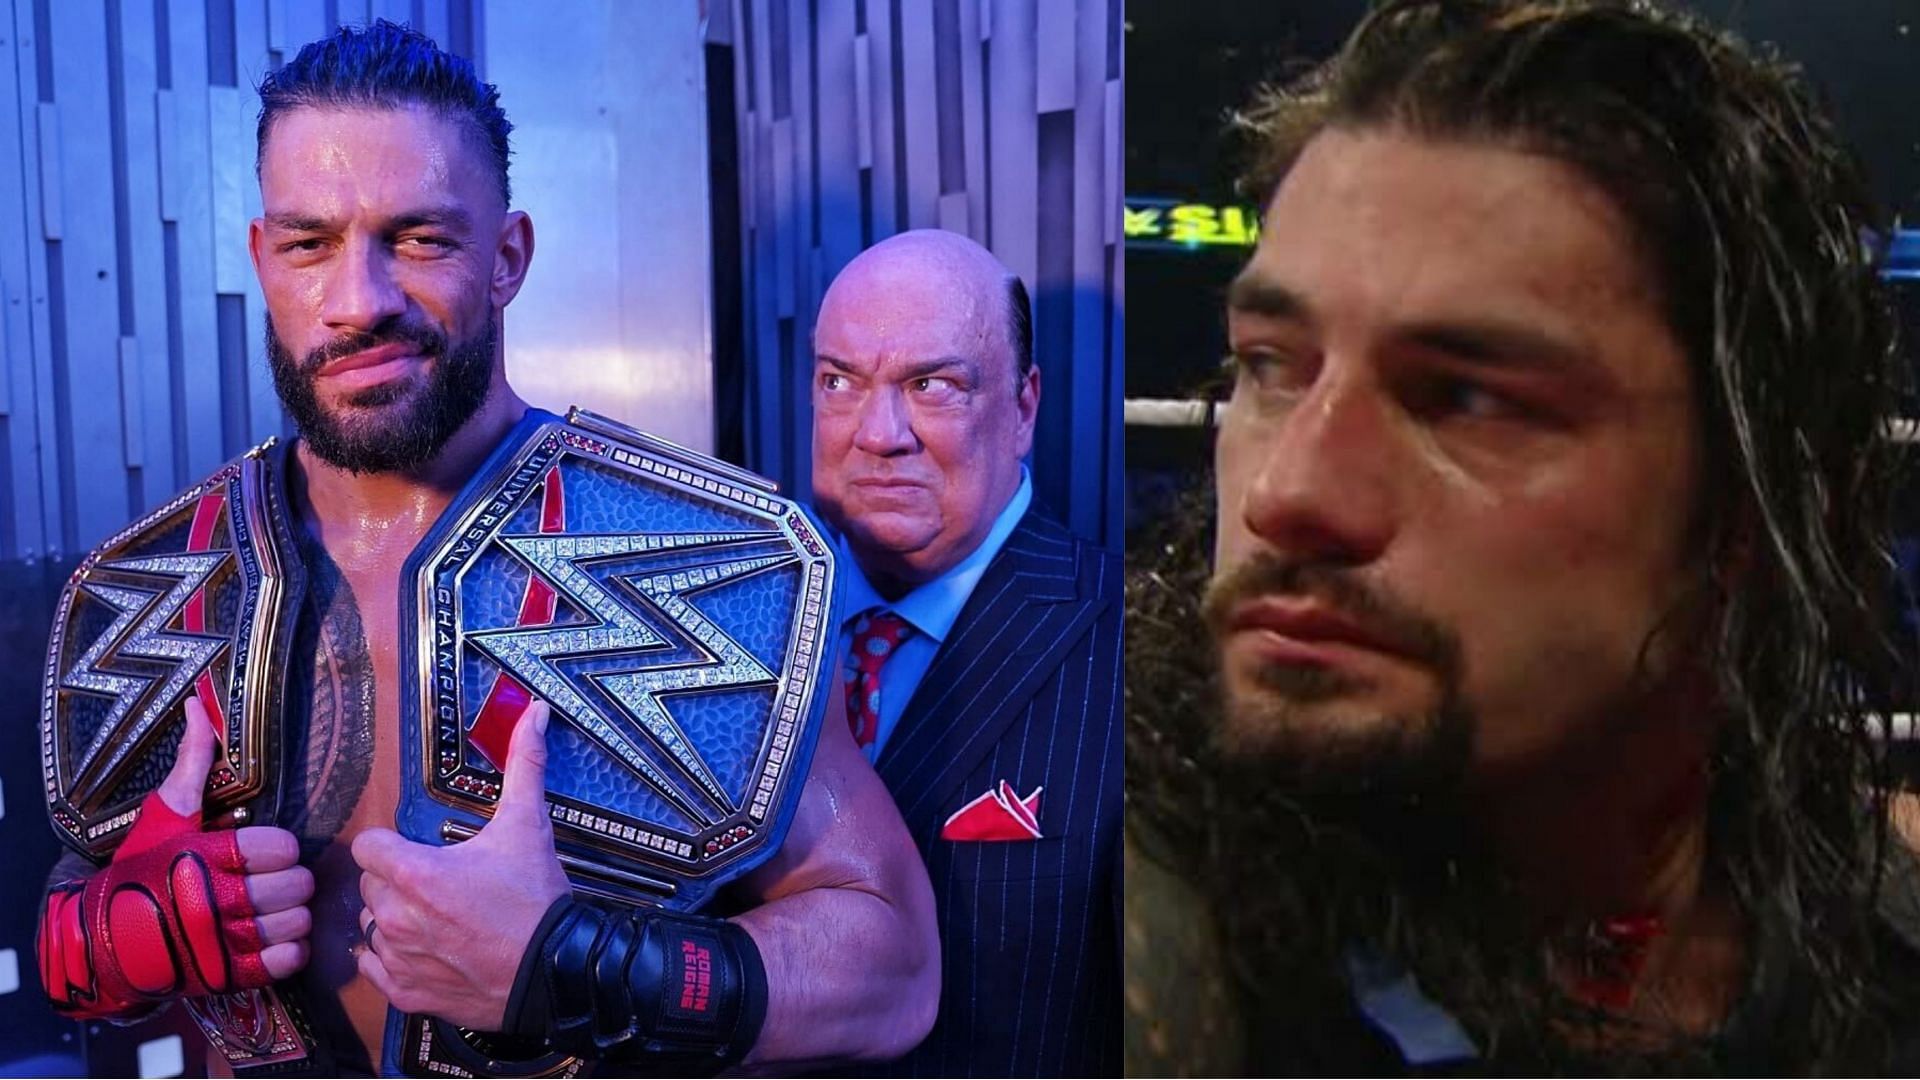 Roman Reigns has grown leaps and bounds since 2015.